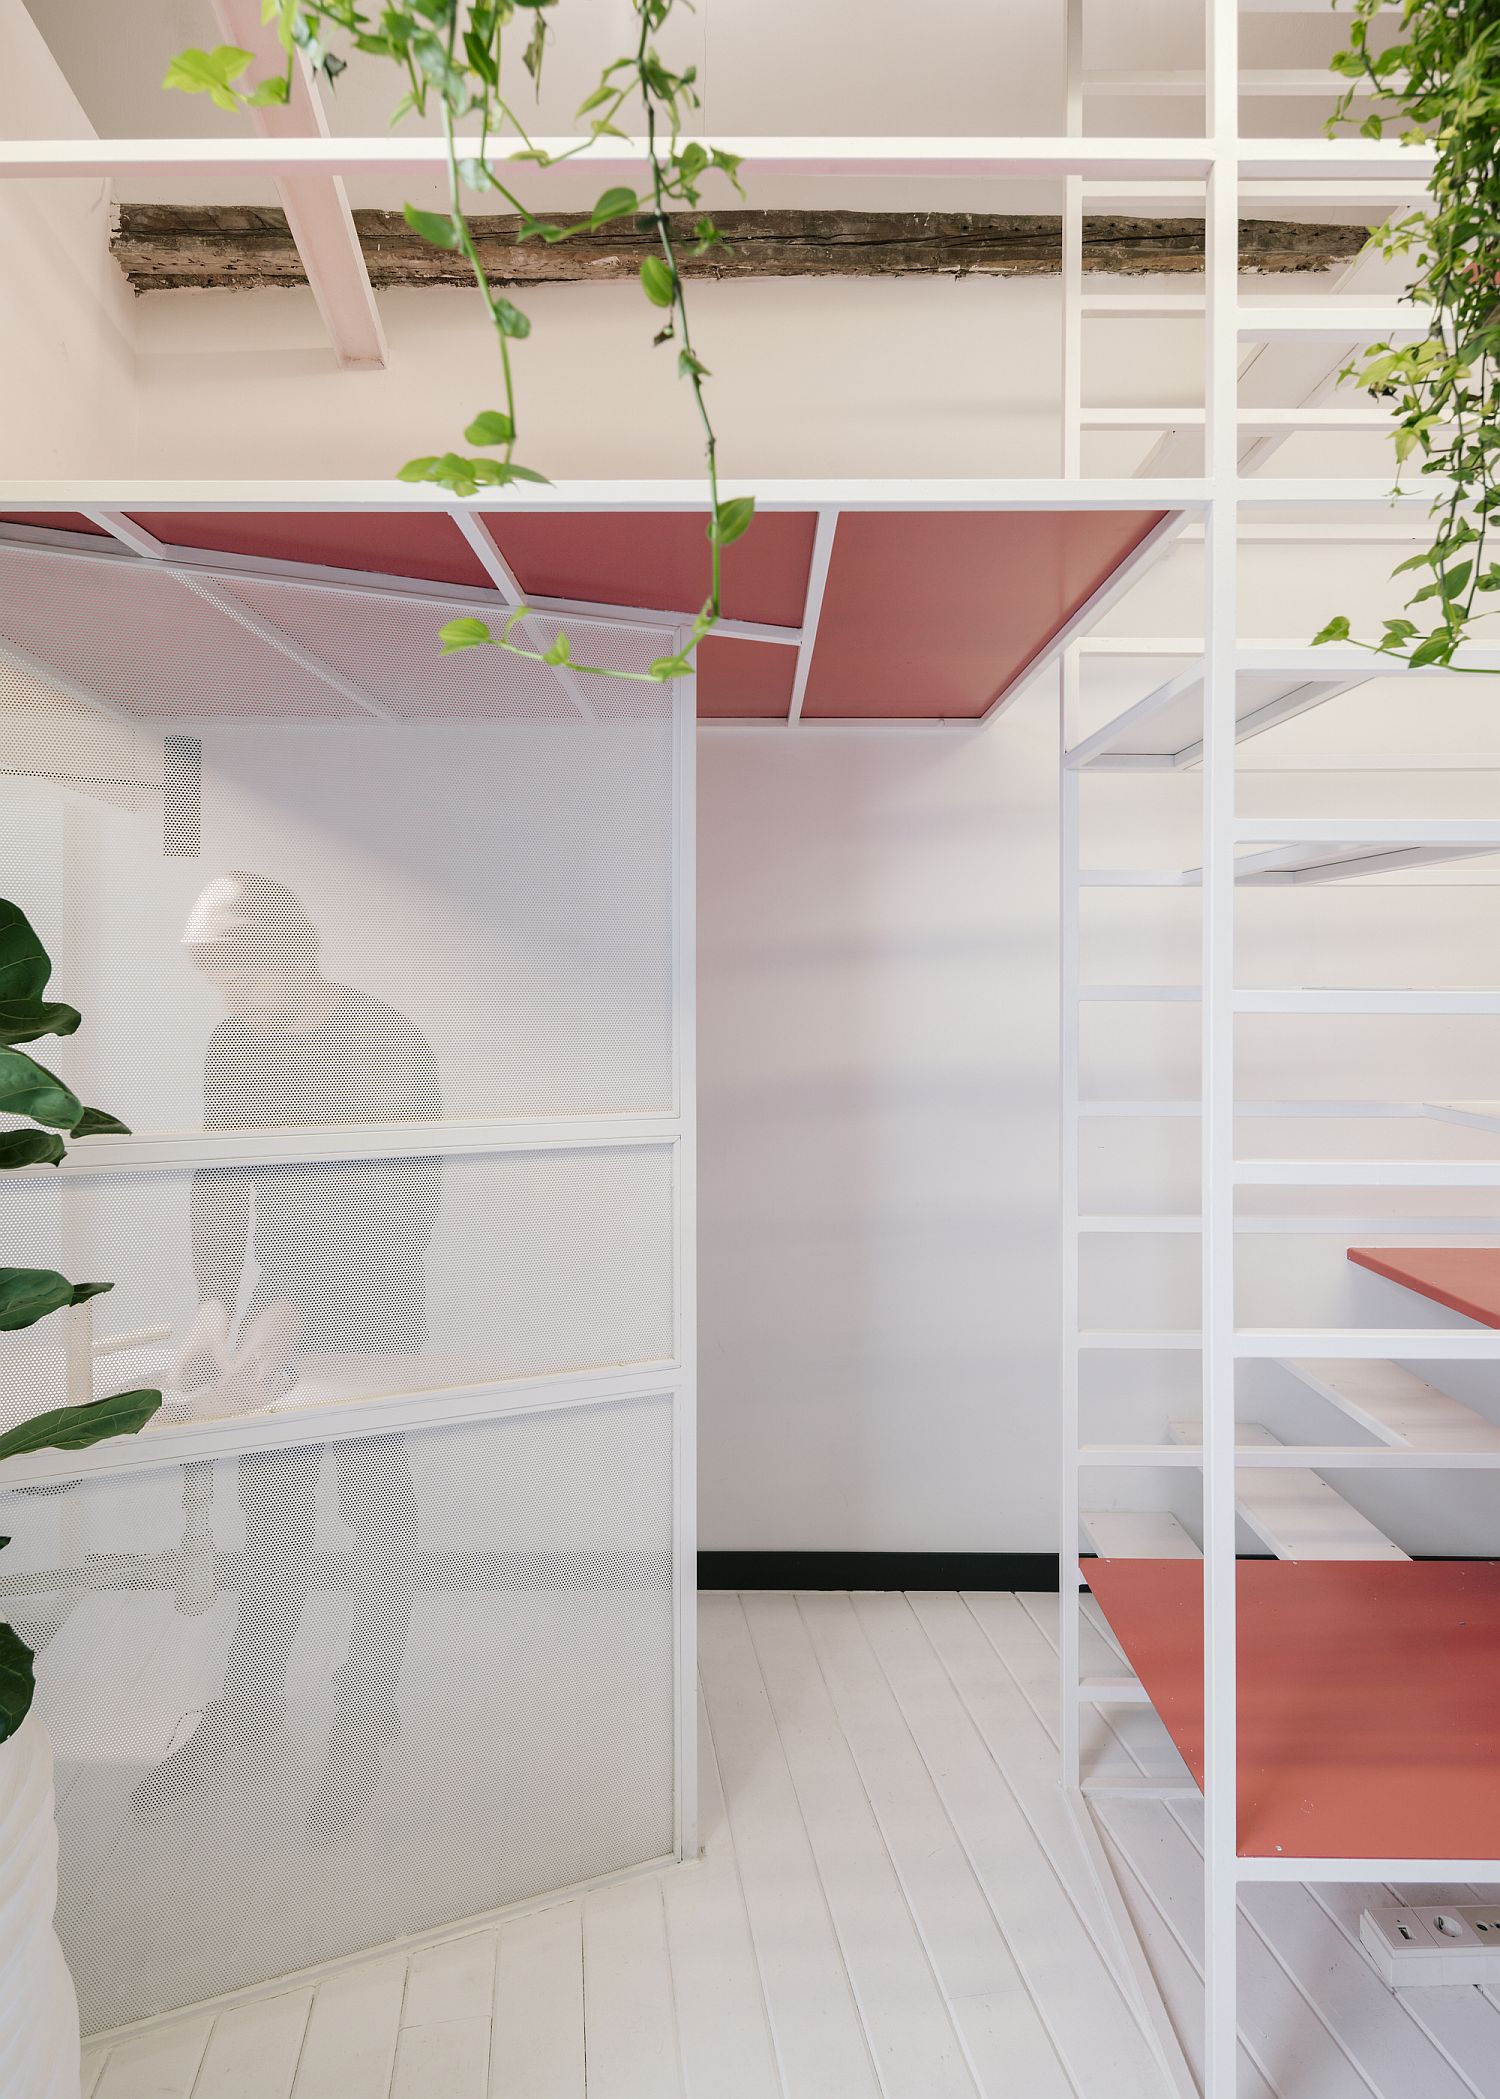 Movable mesh door offers privacy while allowing light to pass through